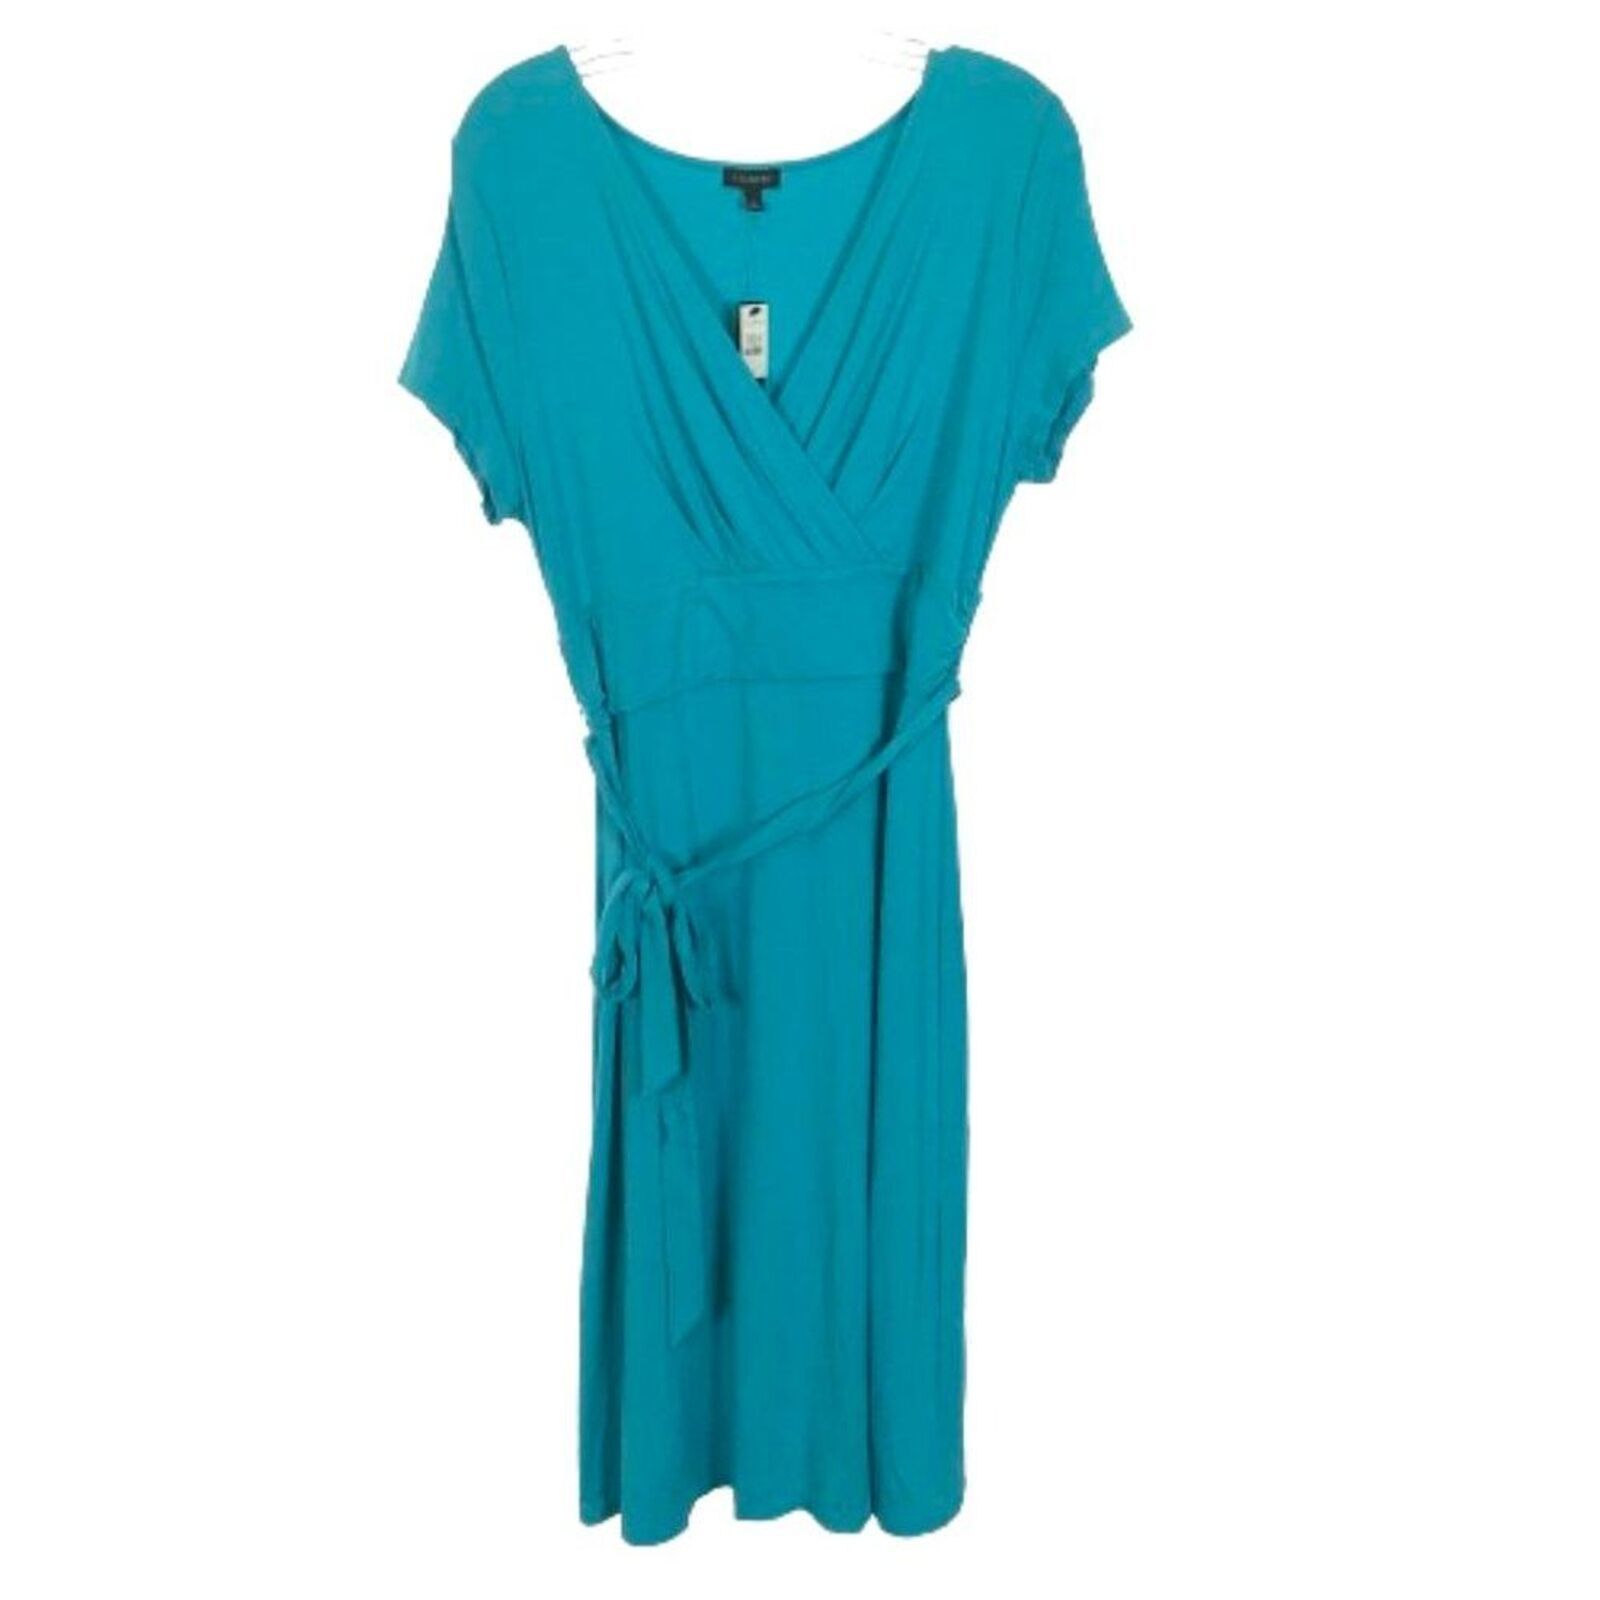 Primary image for NWT Womens Size Large Talbots Teal Stretch Crepe Faux Wrap Midi Dress